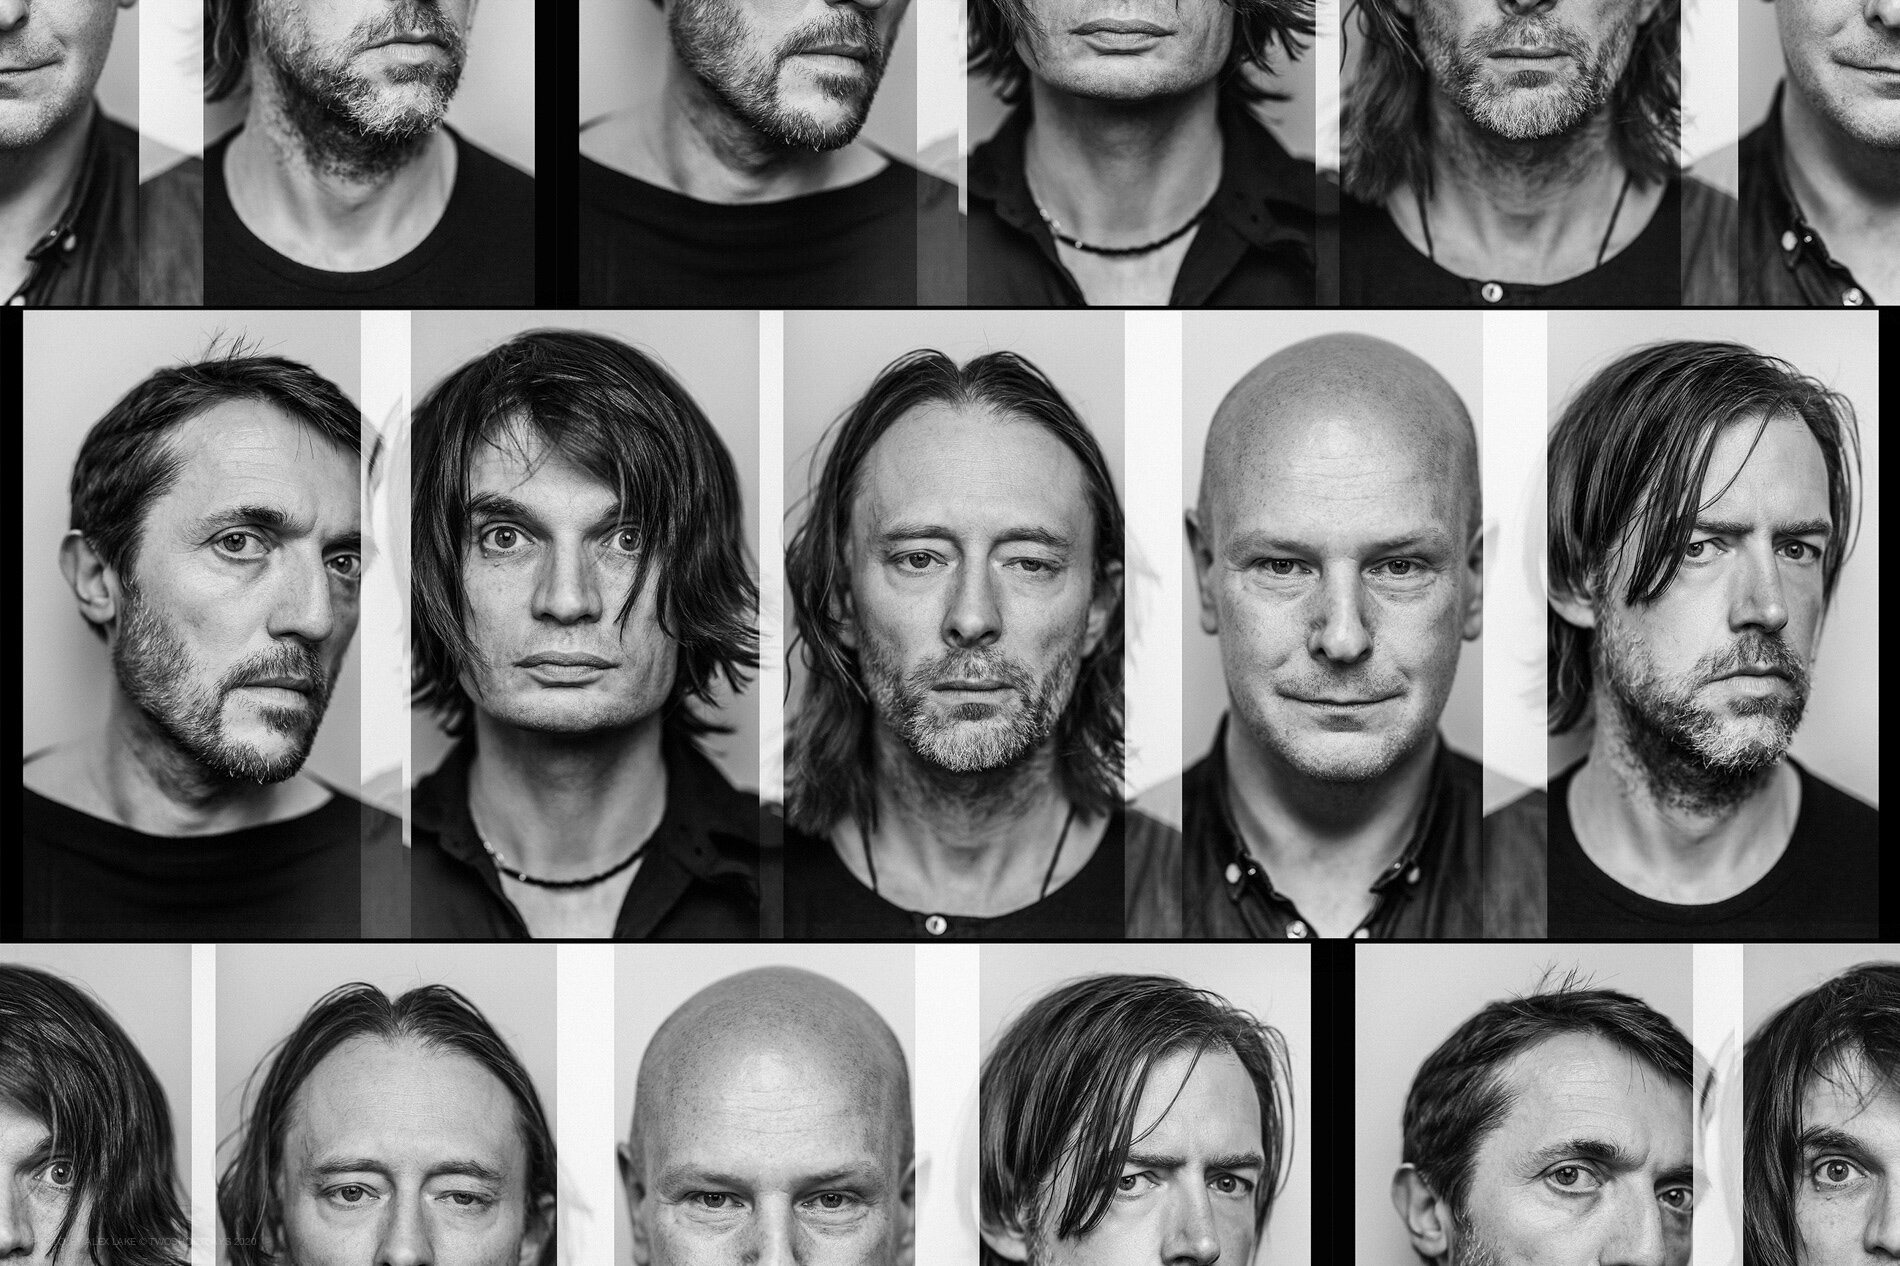 radiohead_photography_copyright_ALEX_LAKE_do_not_reproduce_without_permission_TWOSHORTDAYS.jpg